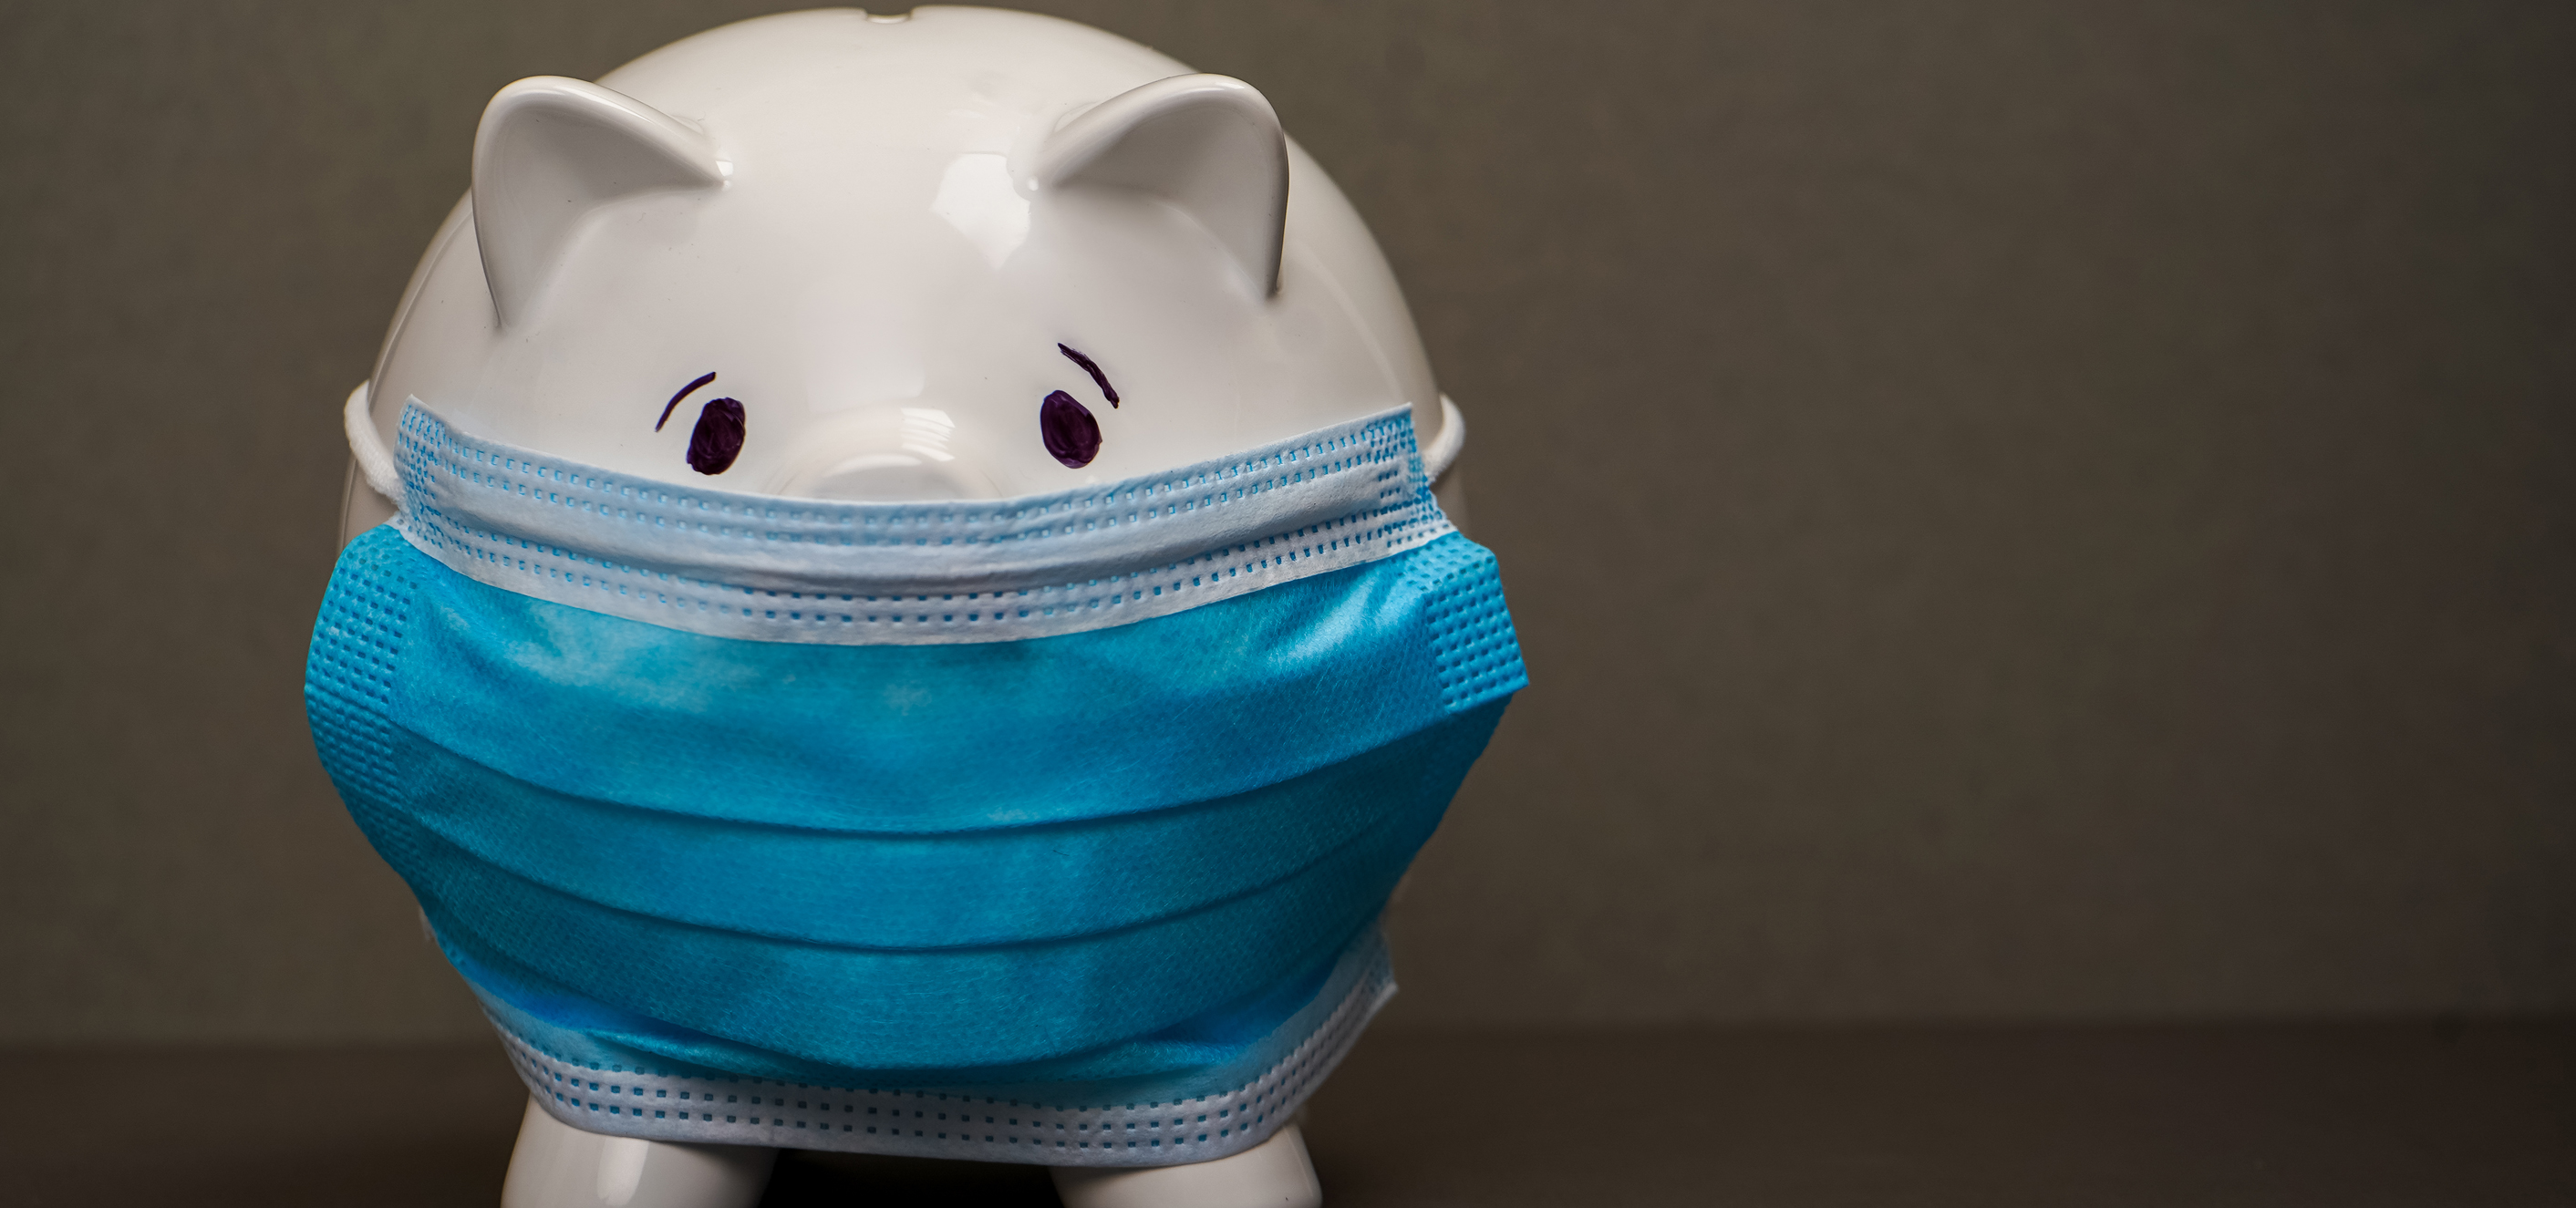 A quintessential white piggy bank left of center wearing a blue, coronavirus type mask, in front of a brownish background.